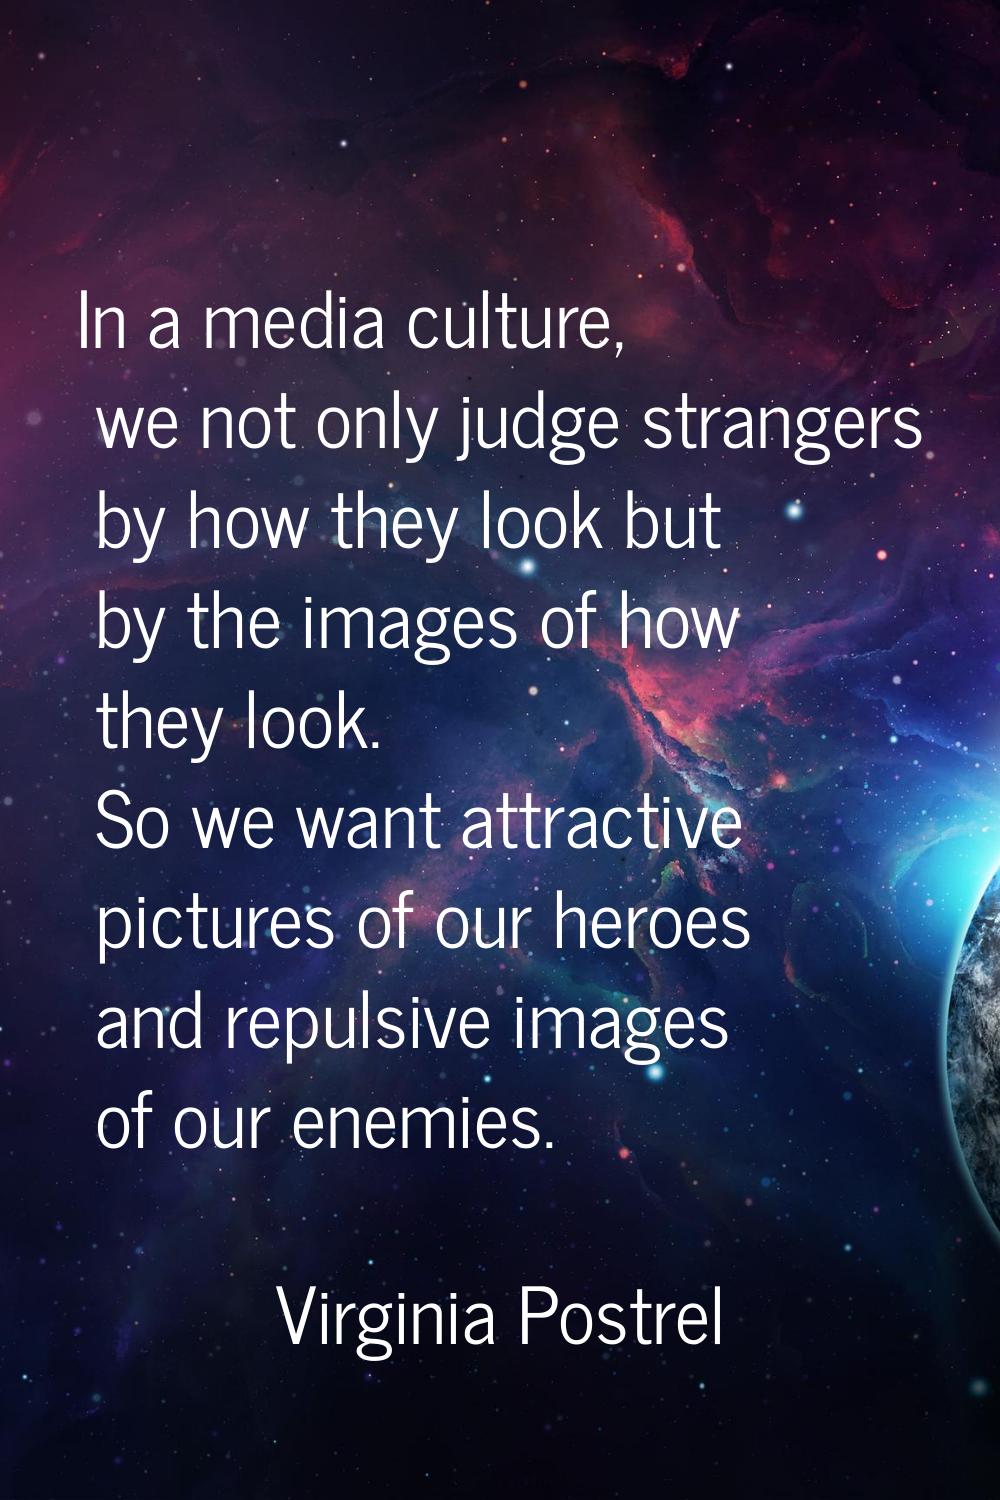 In a media culture, we not only judge strangers by how they look but by the images of how they look